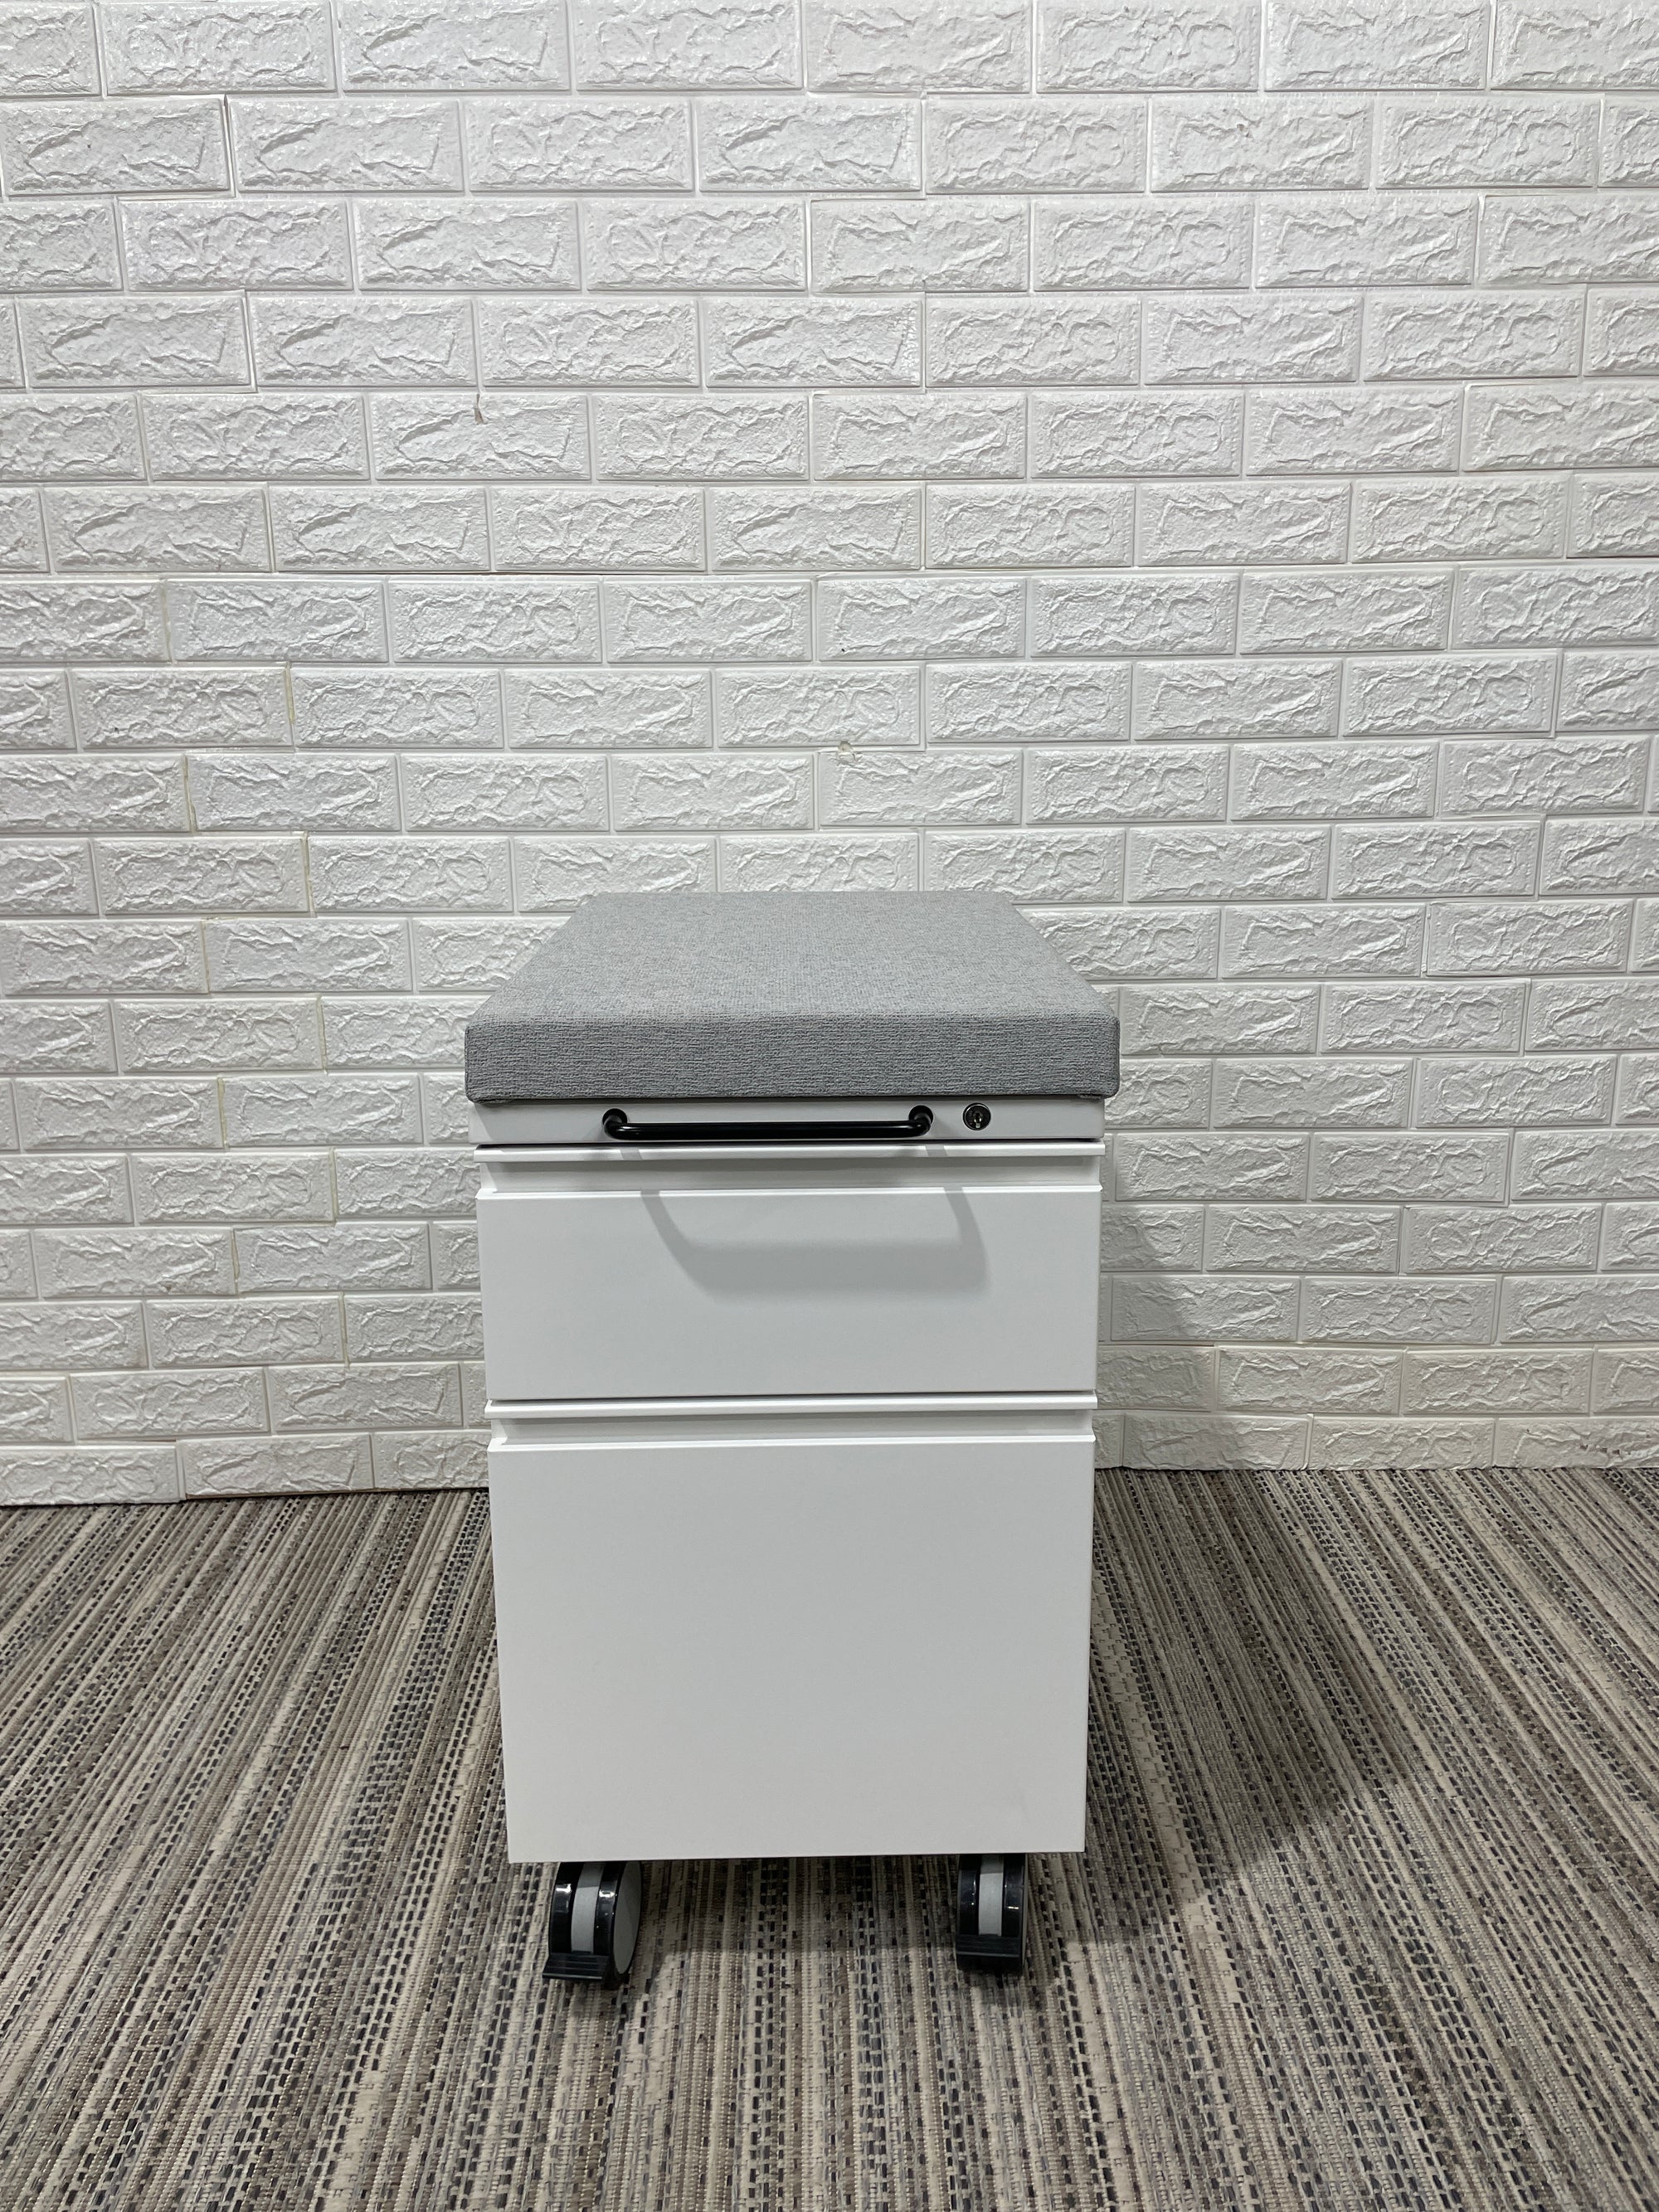 Pre-Owned Pedestals (SUDS) - Duckys Office Furniture